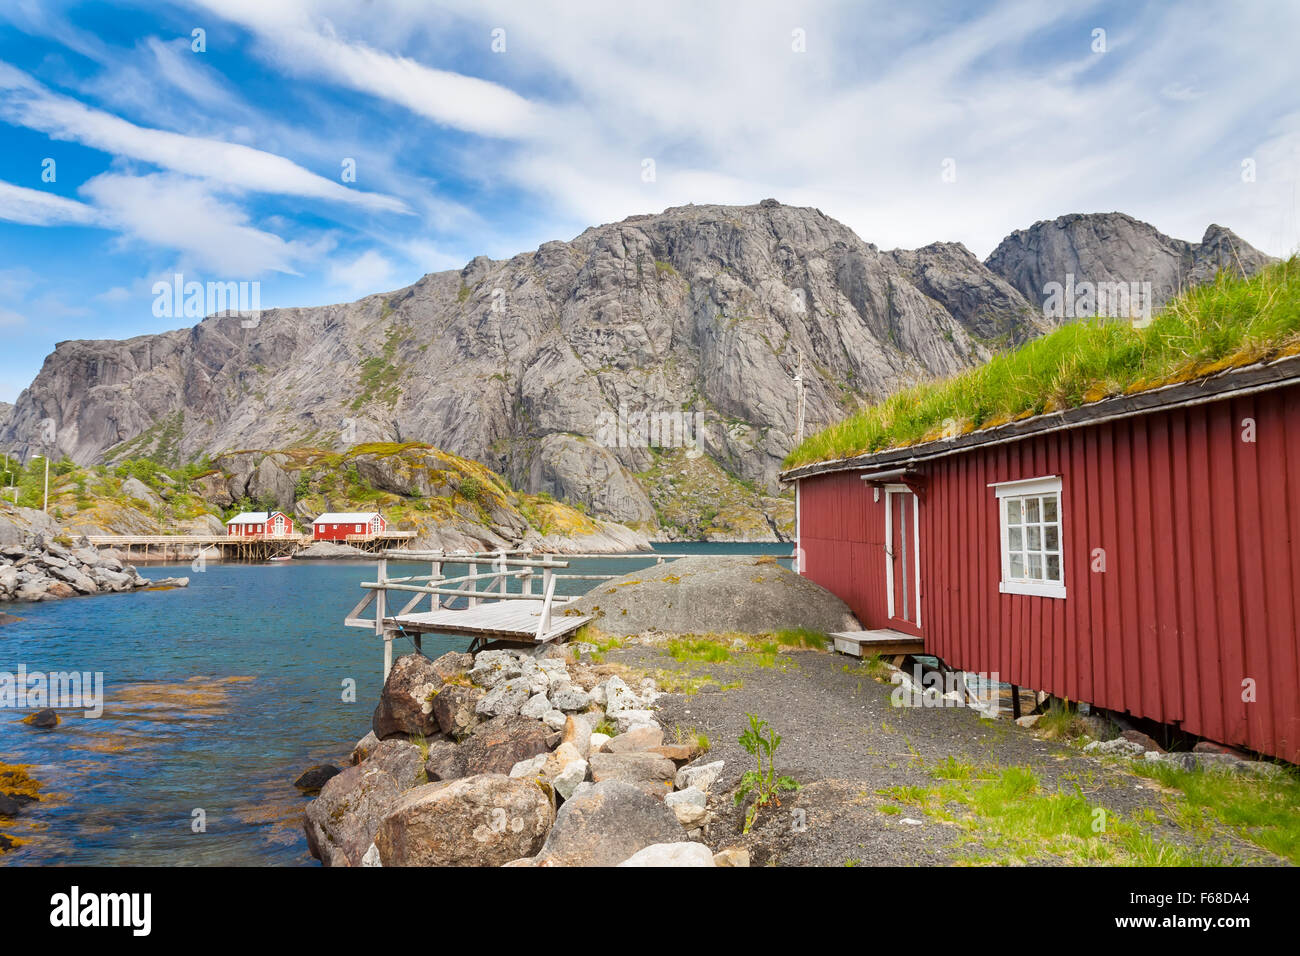 Typical red rorbu fishing hut in town of Svolvaer on Lofoten islands in Norway lit by midnight sun Stock Photo